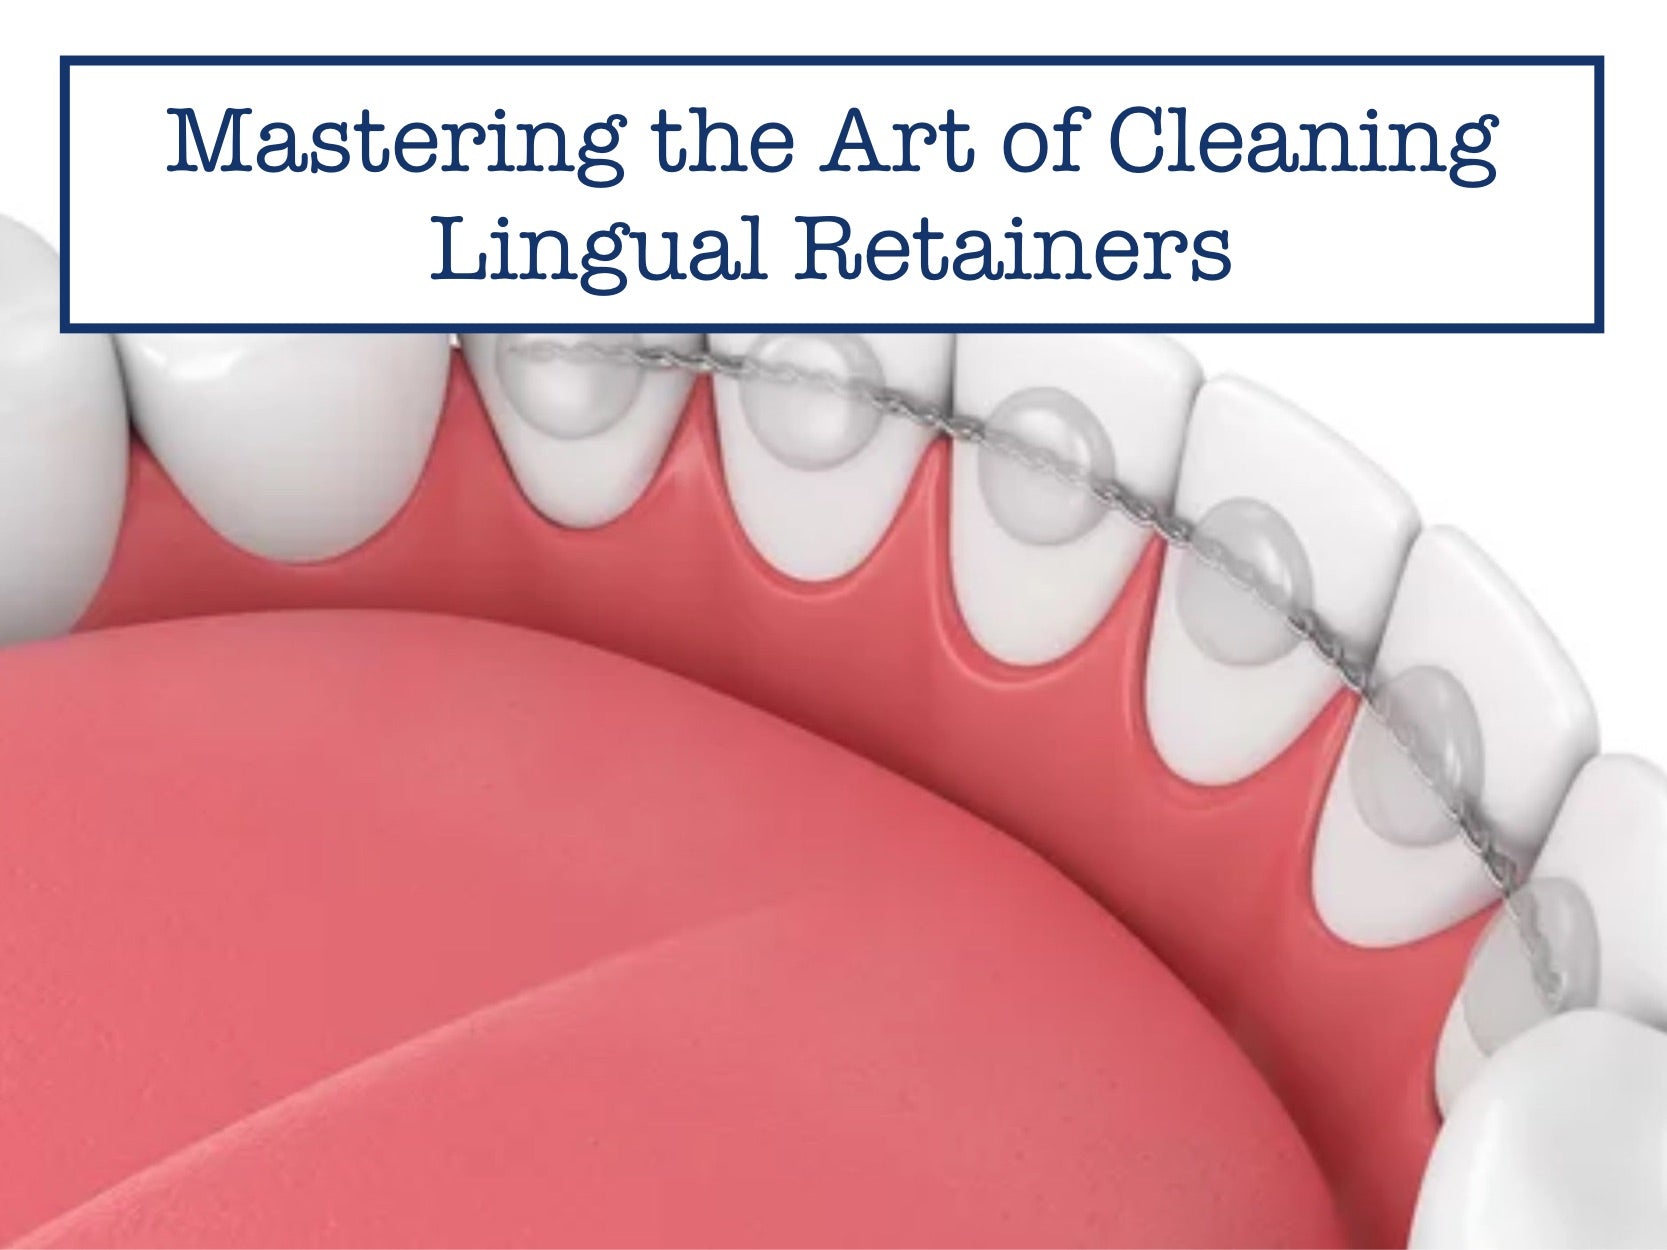 Mastering the Art of Cleaning Lingual Retainers